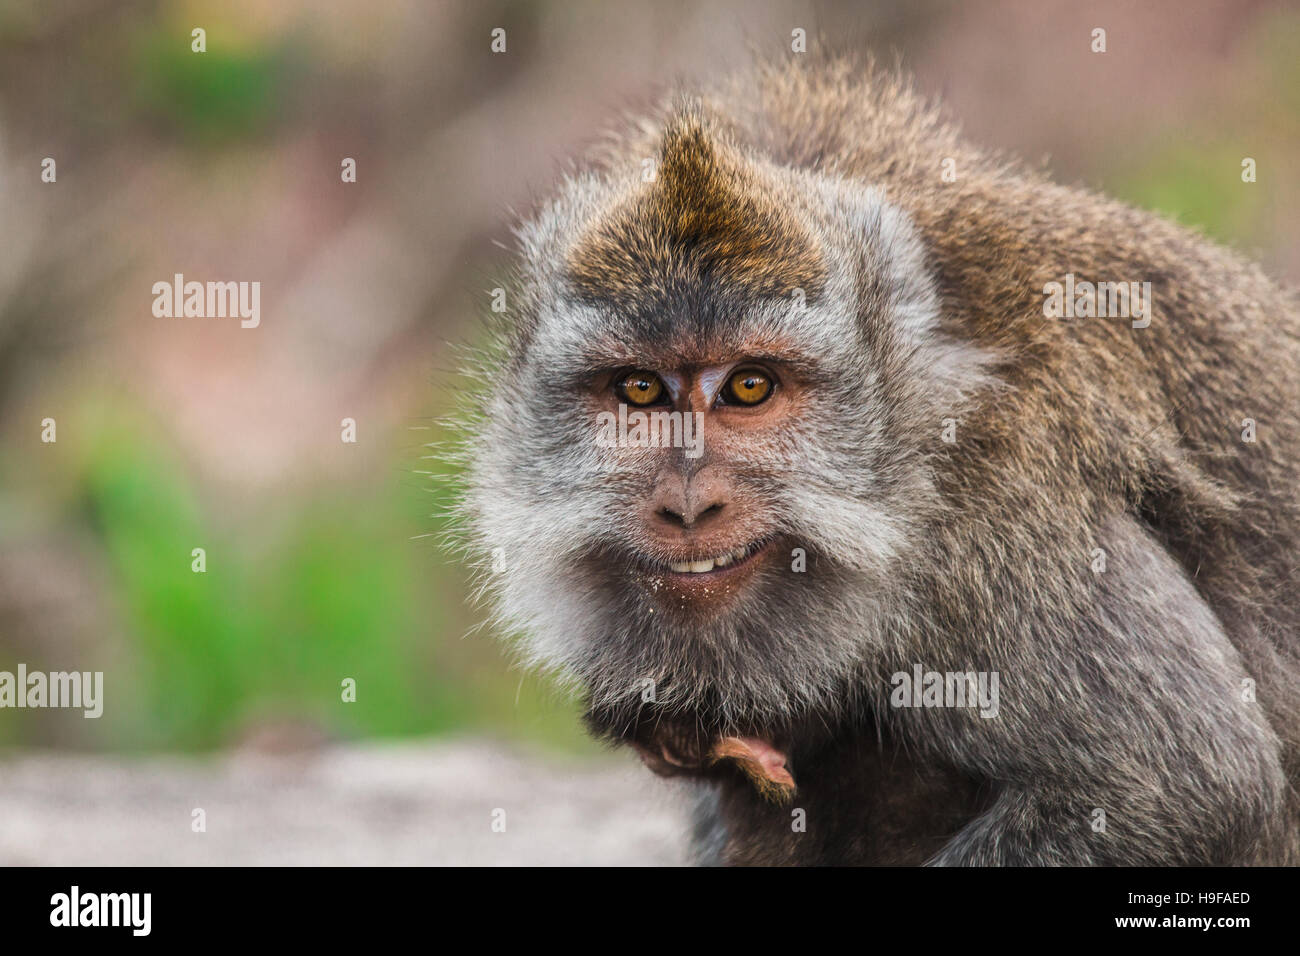 A monkey grinning into the camera, holding a baby monkey Stock Photo